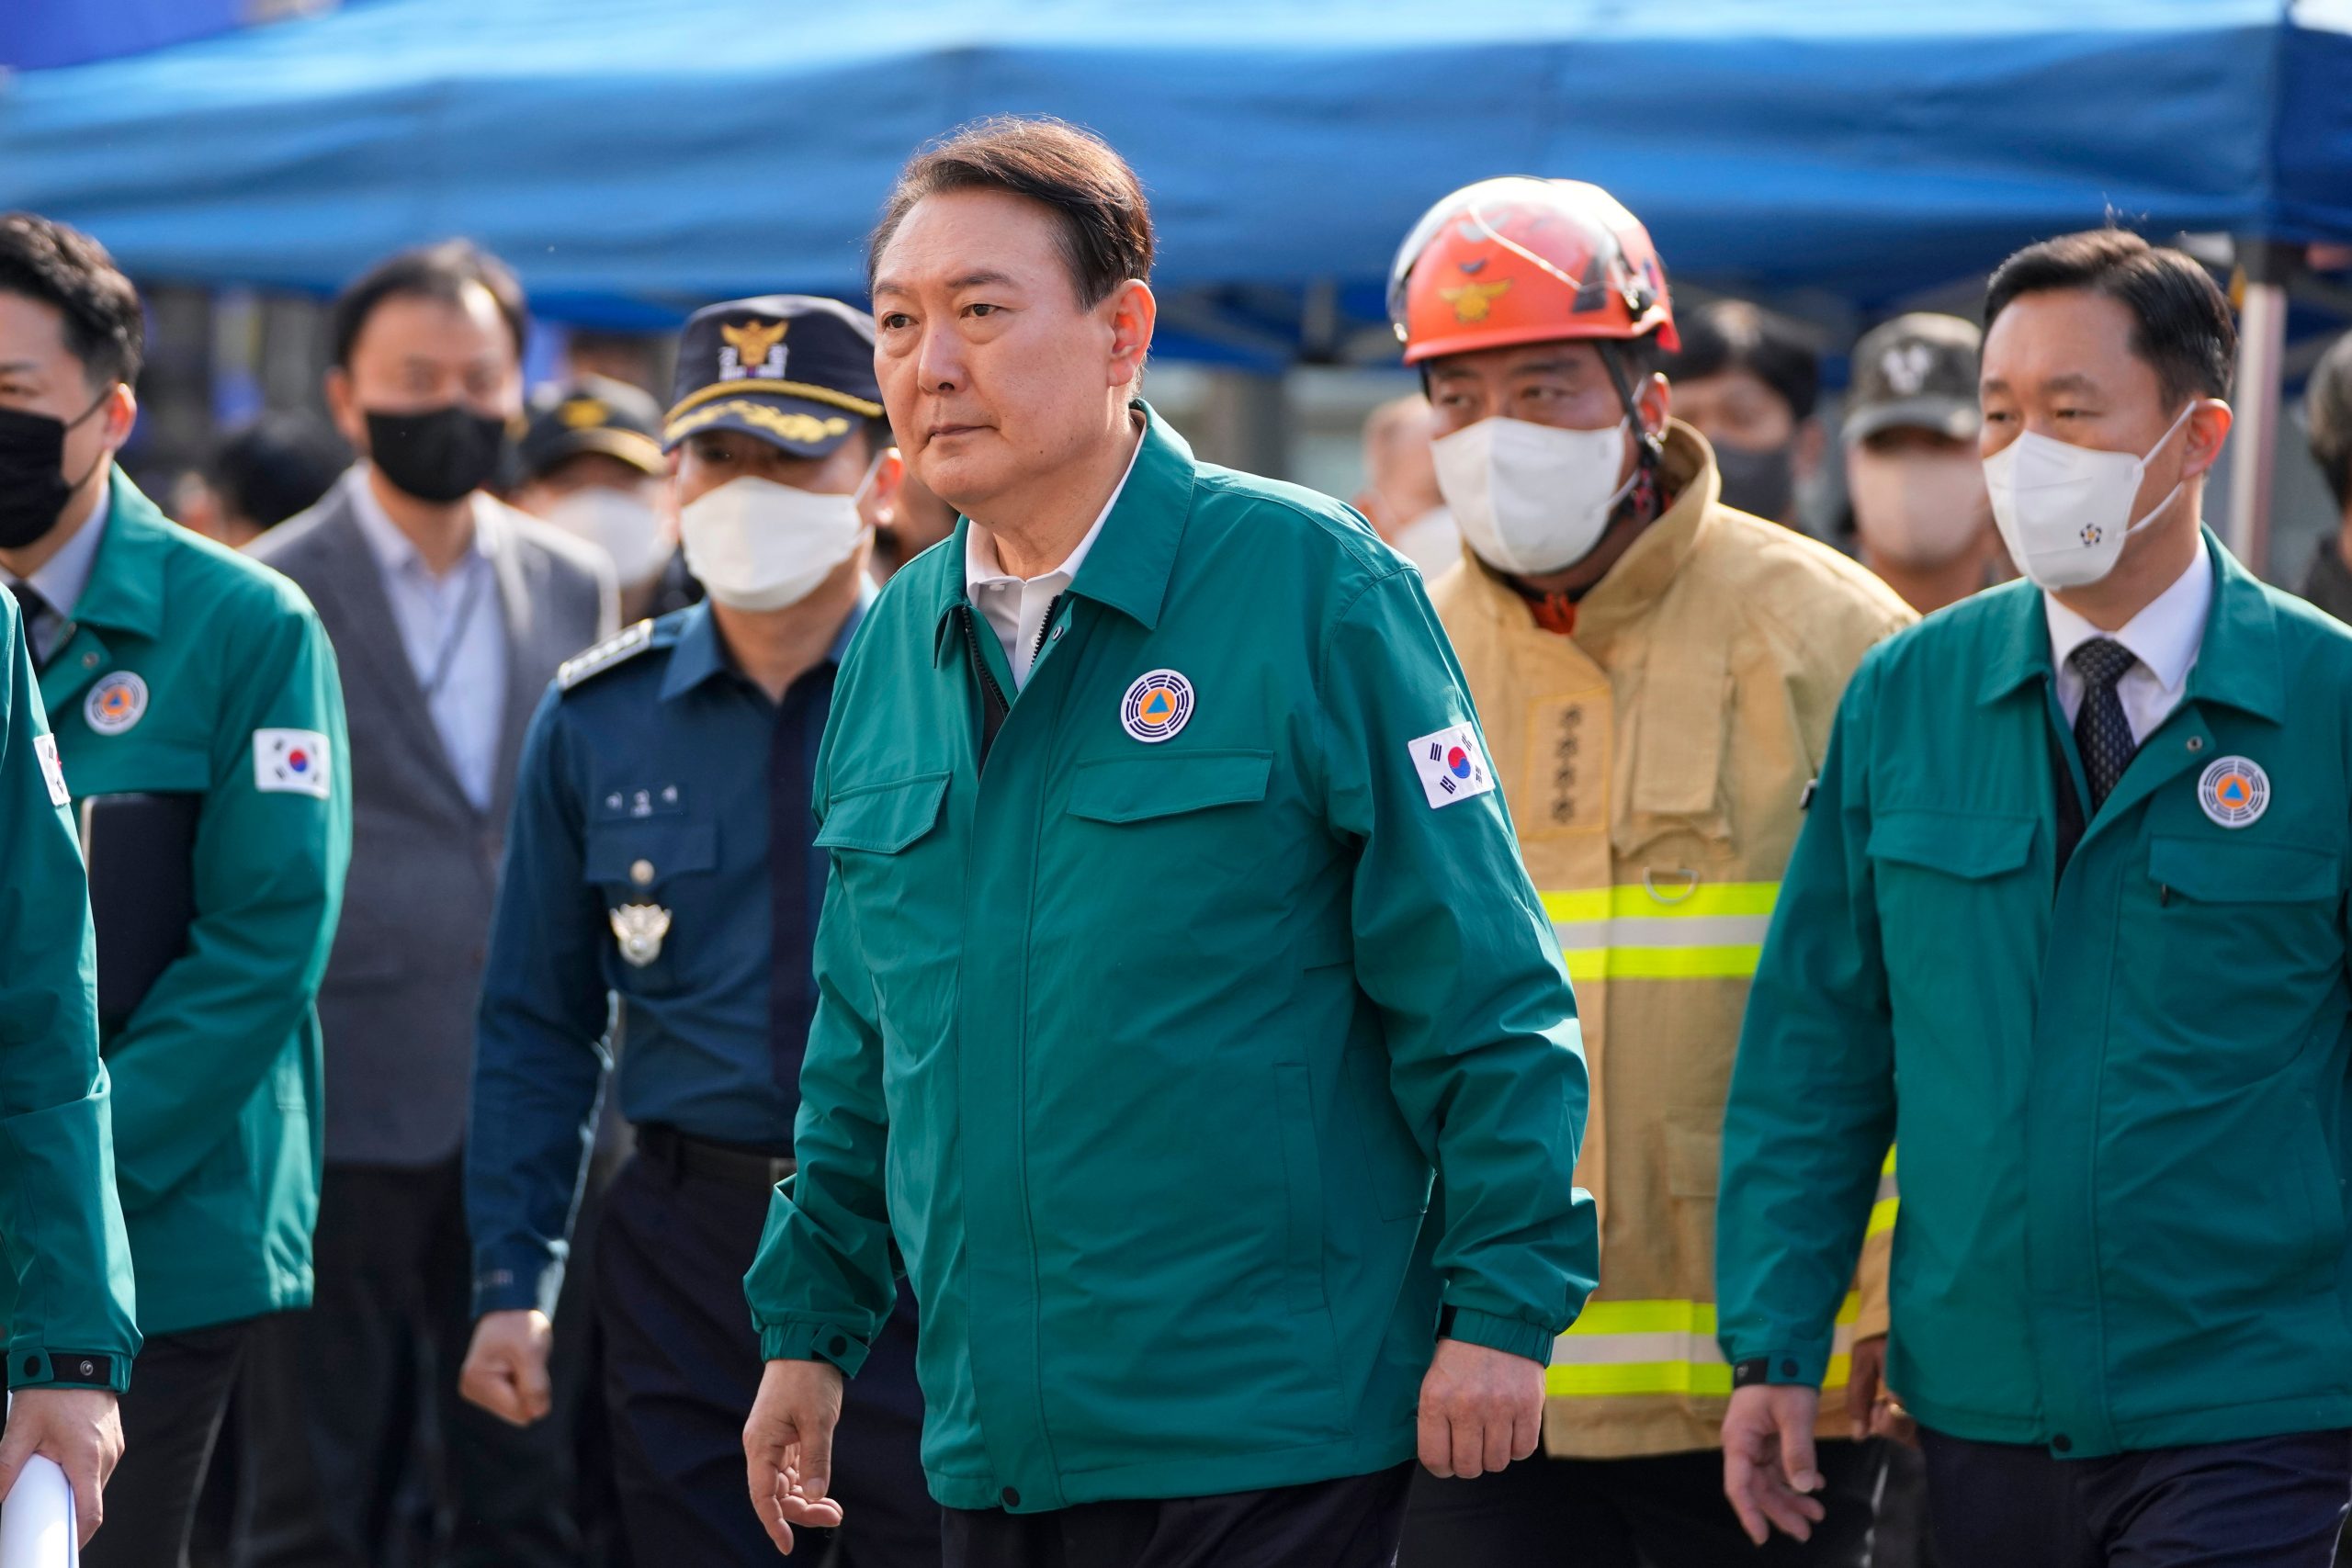 Seoul tragedy: What the period of national mourning entails